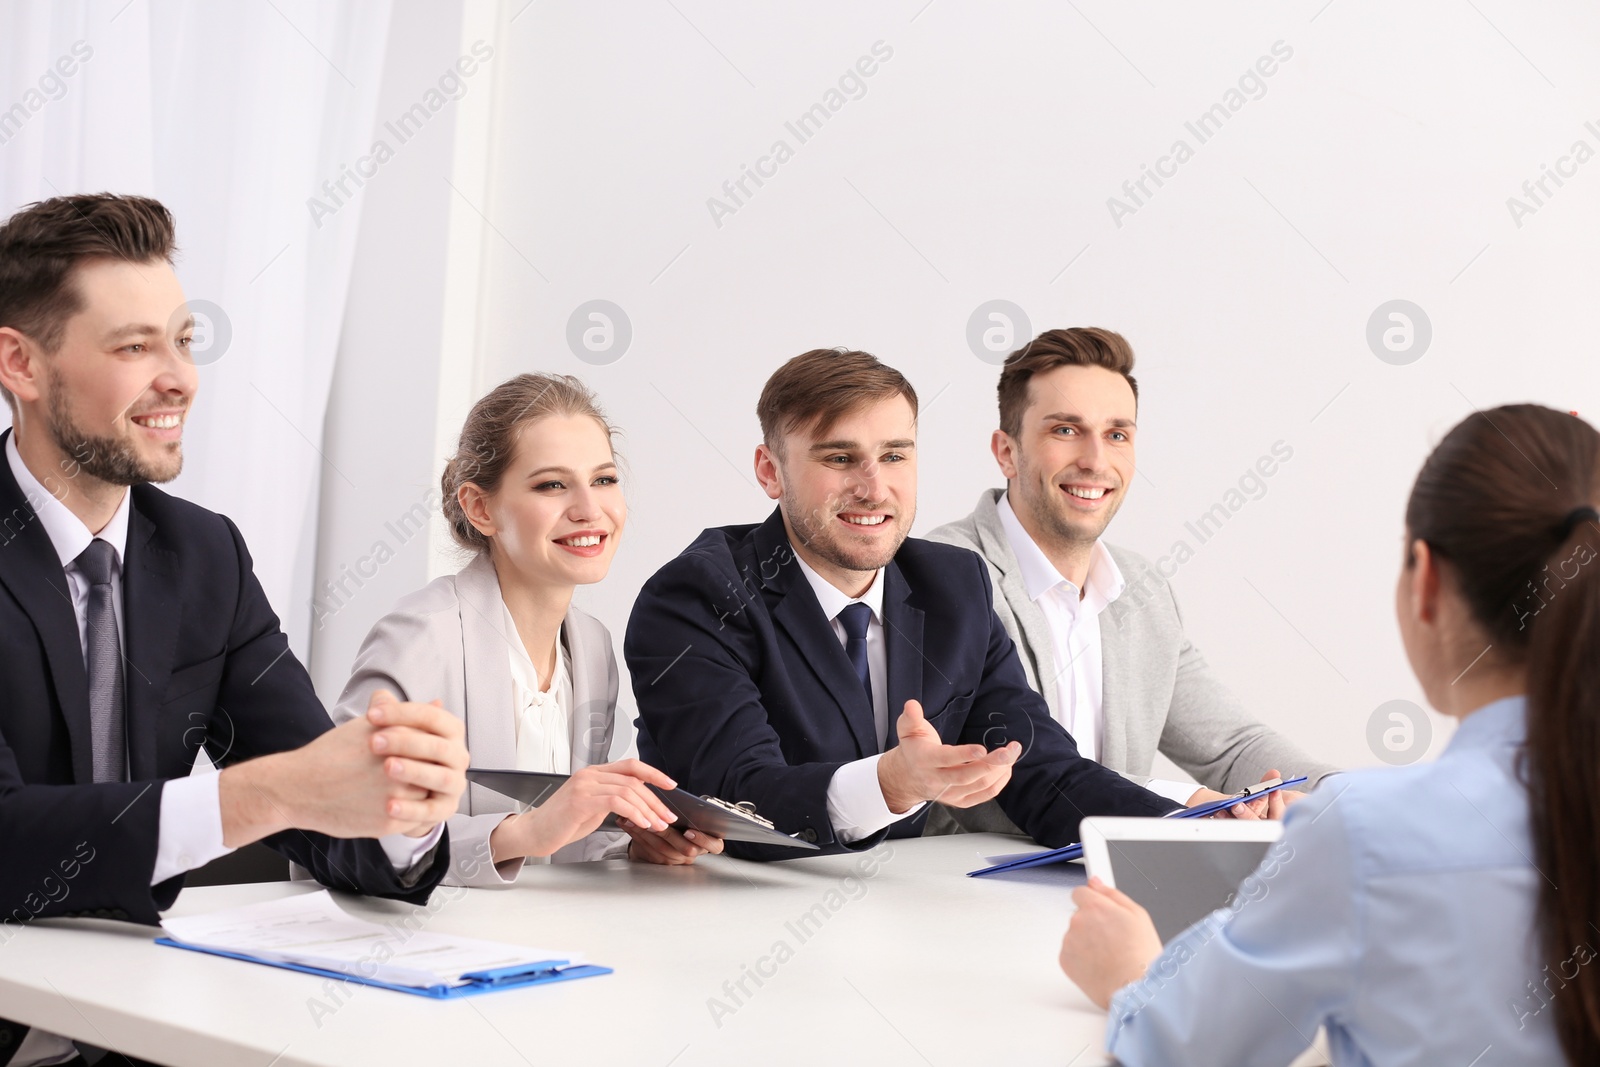 Photo of Human resources commission conducting job interview with applicant, indoors